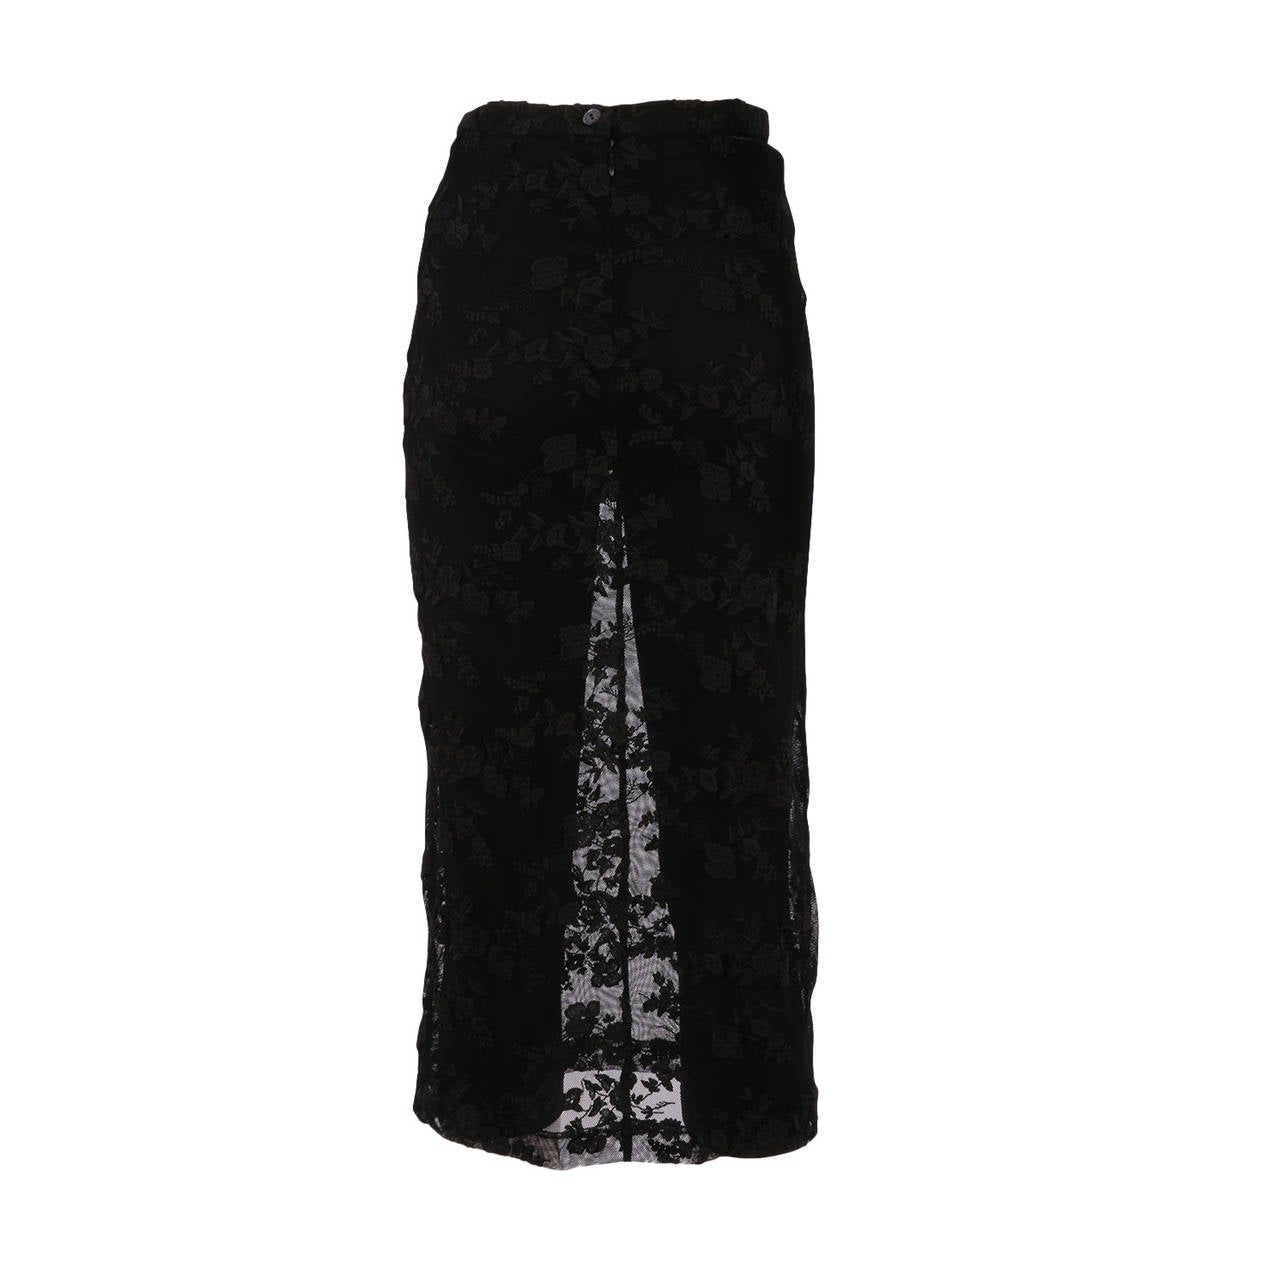 Dolce & Gabbana Black Pedal Pusher Leggings with Lace Skirt Overlay For Sale